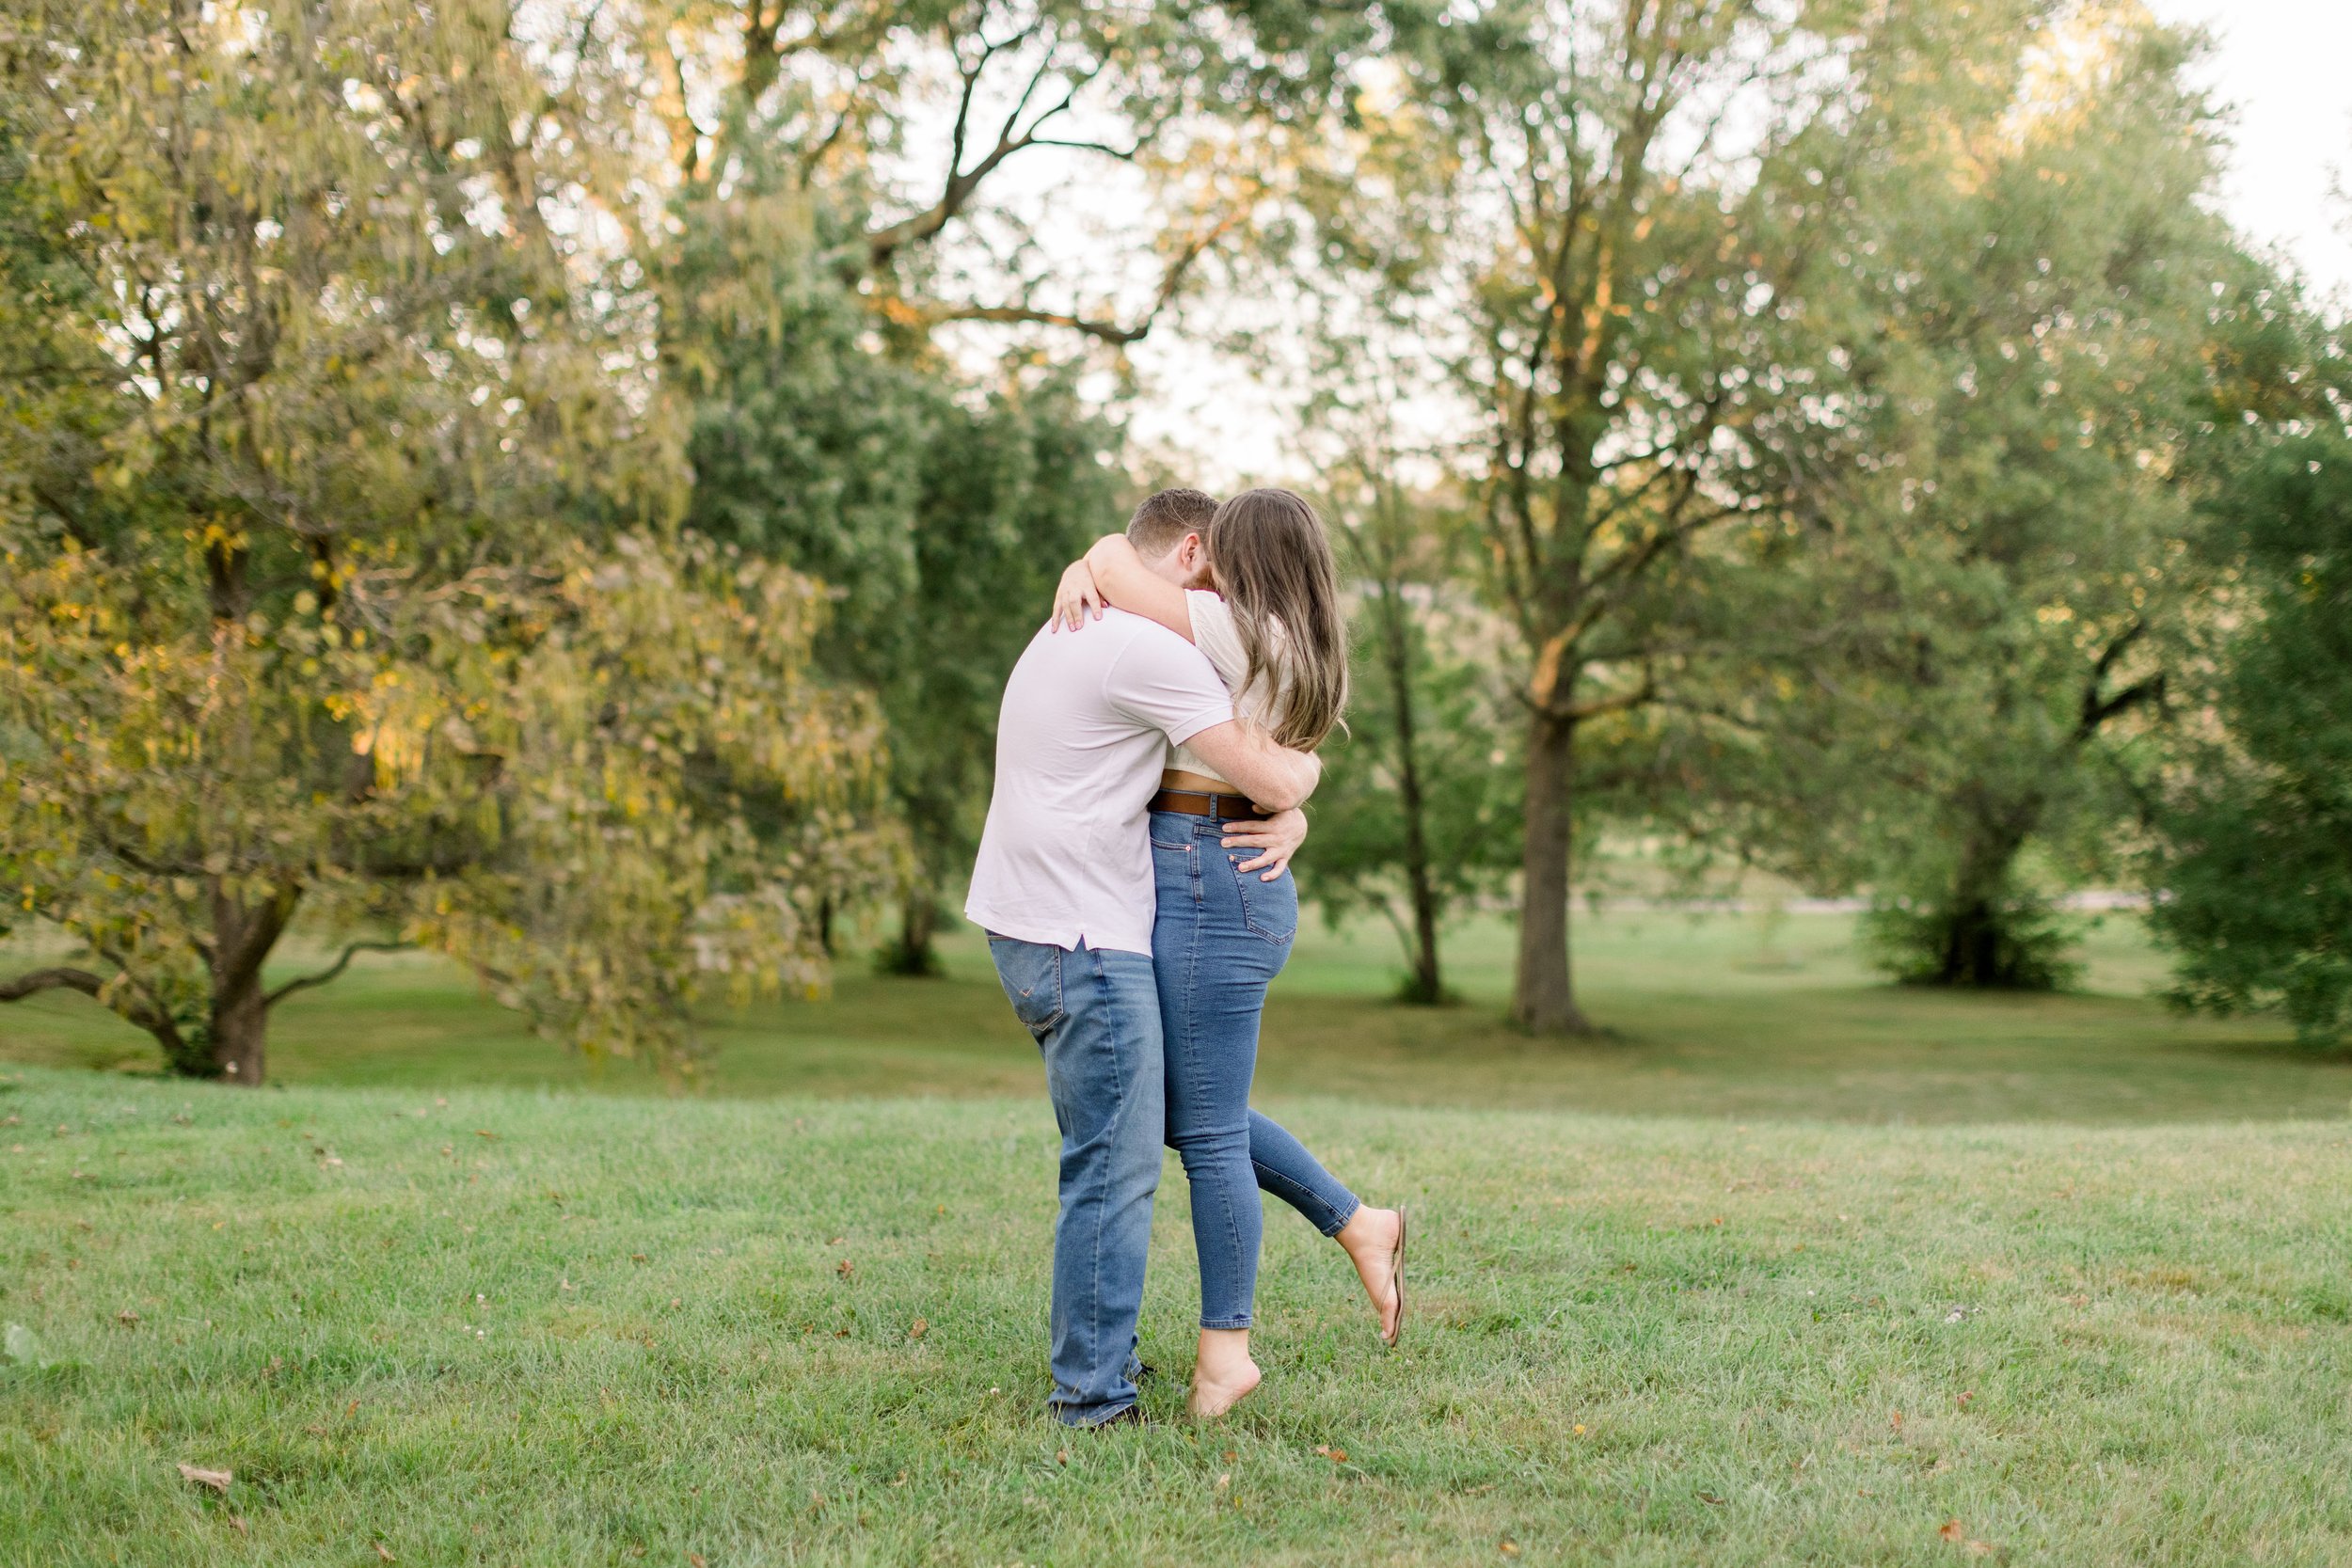  With shoes off an engaged couple embraces on a green grass field by Chelsea Mason Photography. summer engagement #ChelseaMasonPhotography #ChelseaMasonEngagements #Ottawaphotographers #ArboretumOttawaEngagments #weddingannouncementportraits 